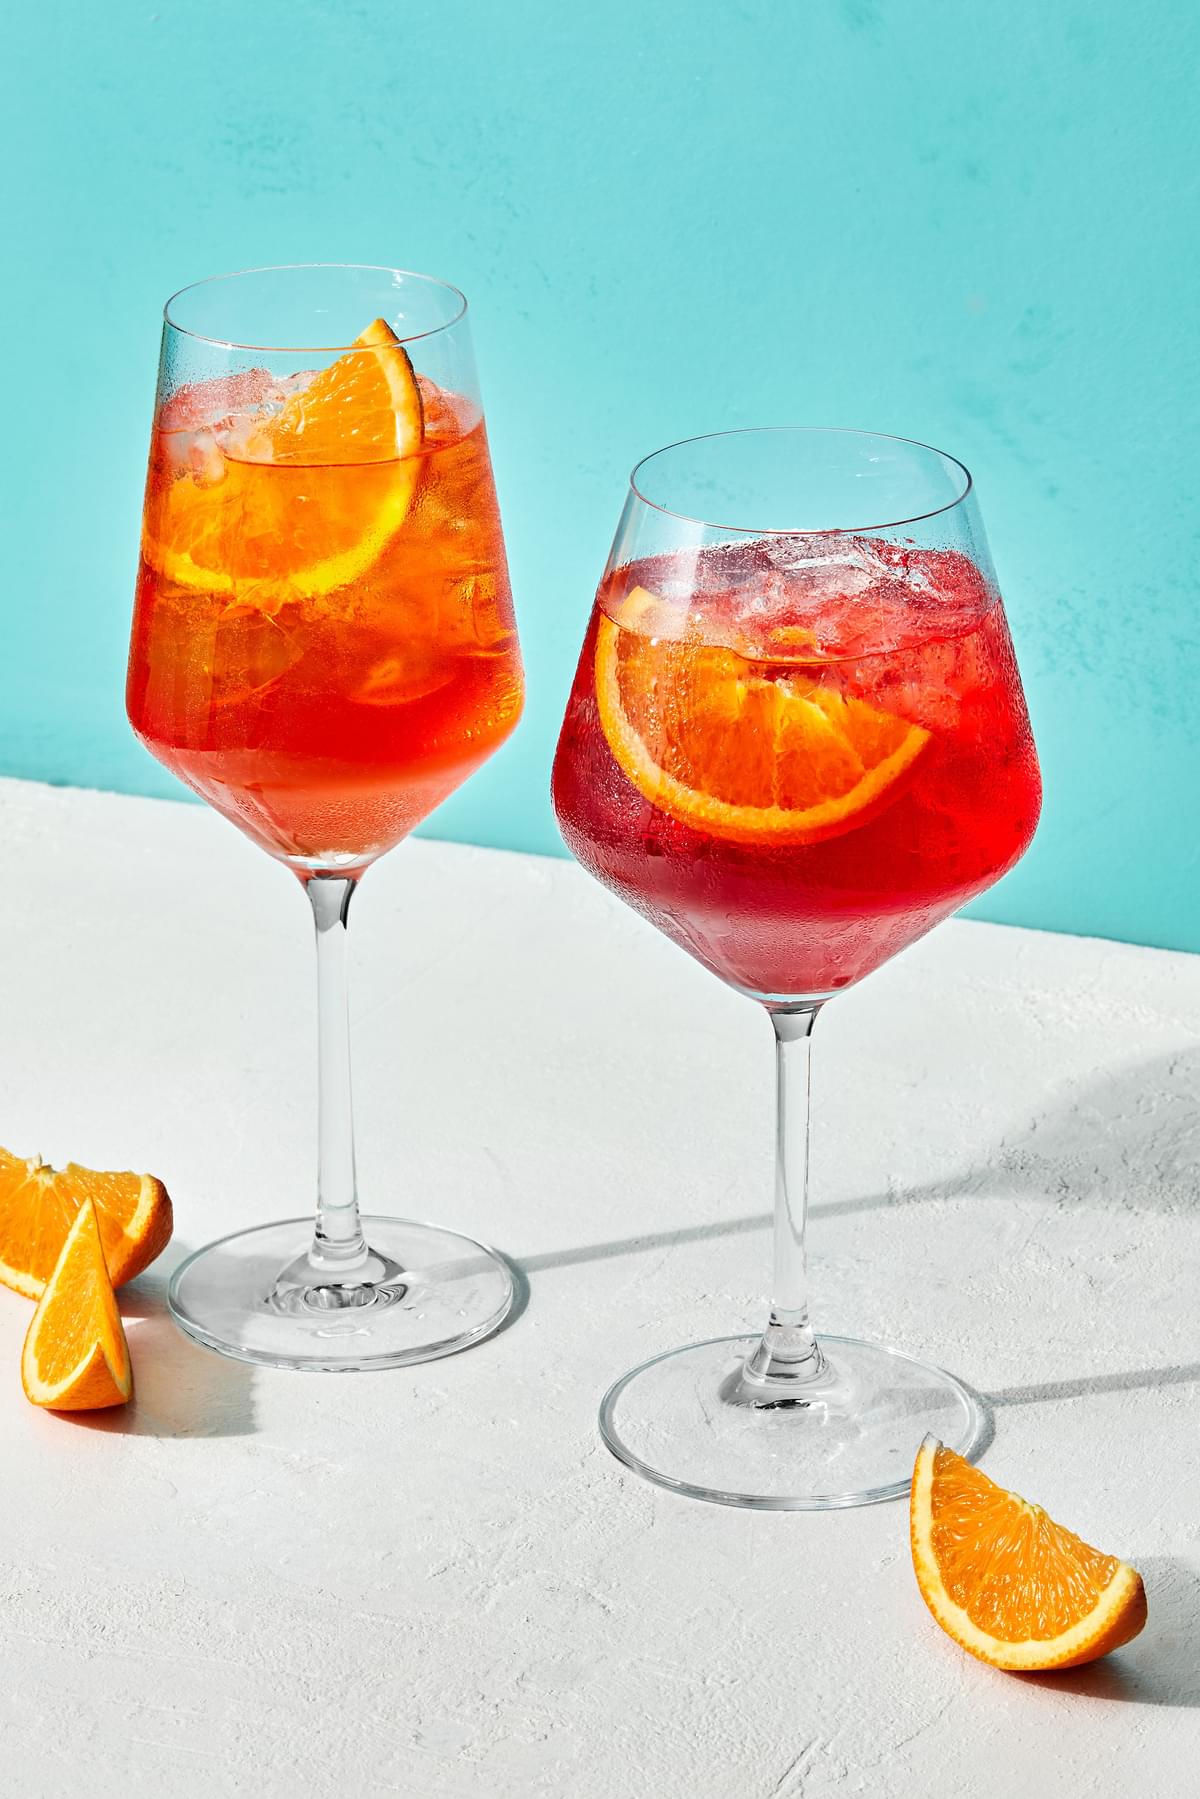 2 glasses of  campari spritz made with prosecco, Campari, sparkling water with  orange wedges for garnish